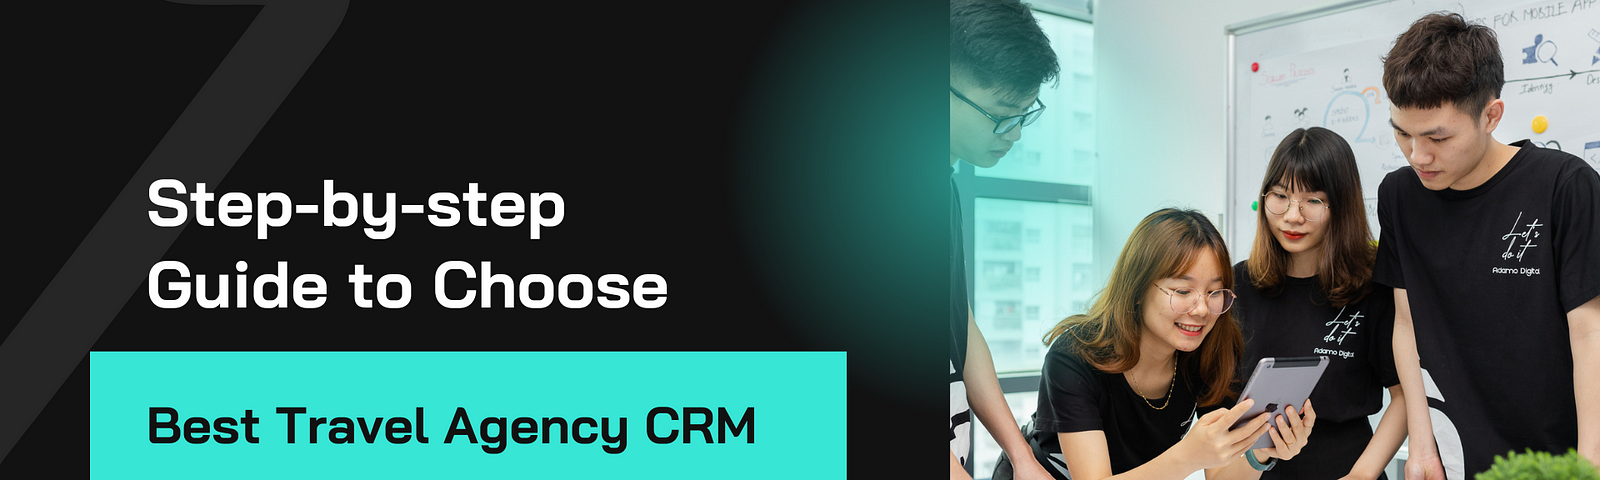 Step-by-step Guide to Choose the Best Travel Agency CRM